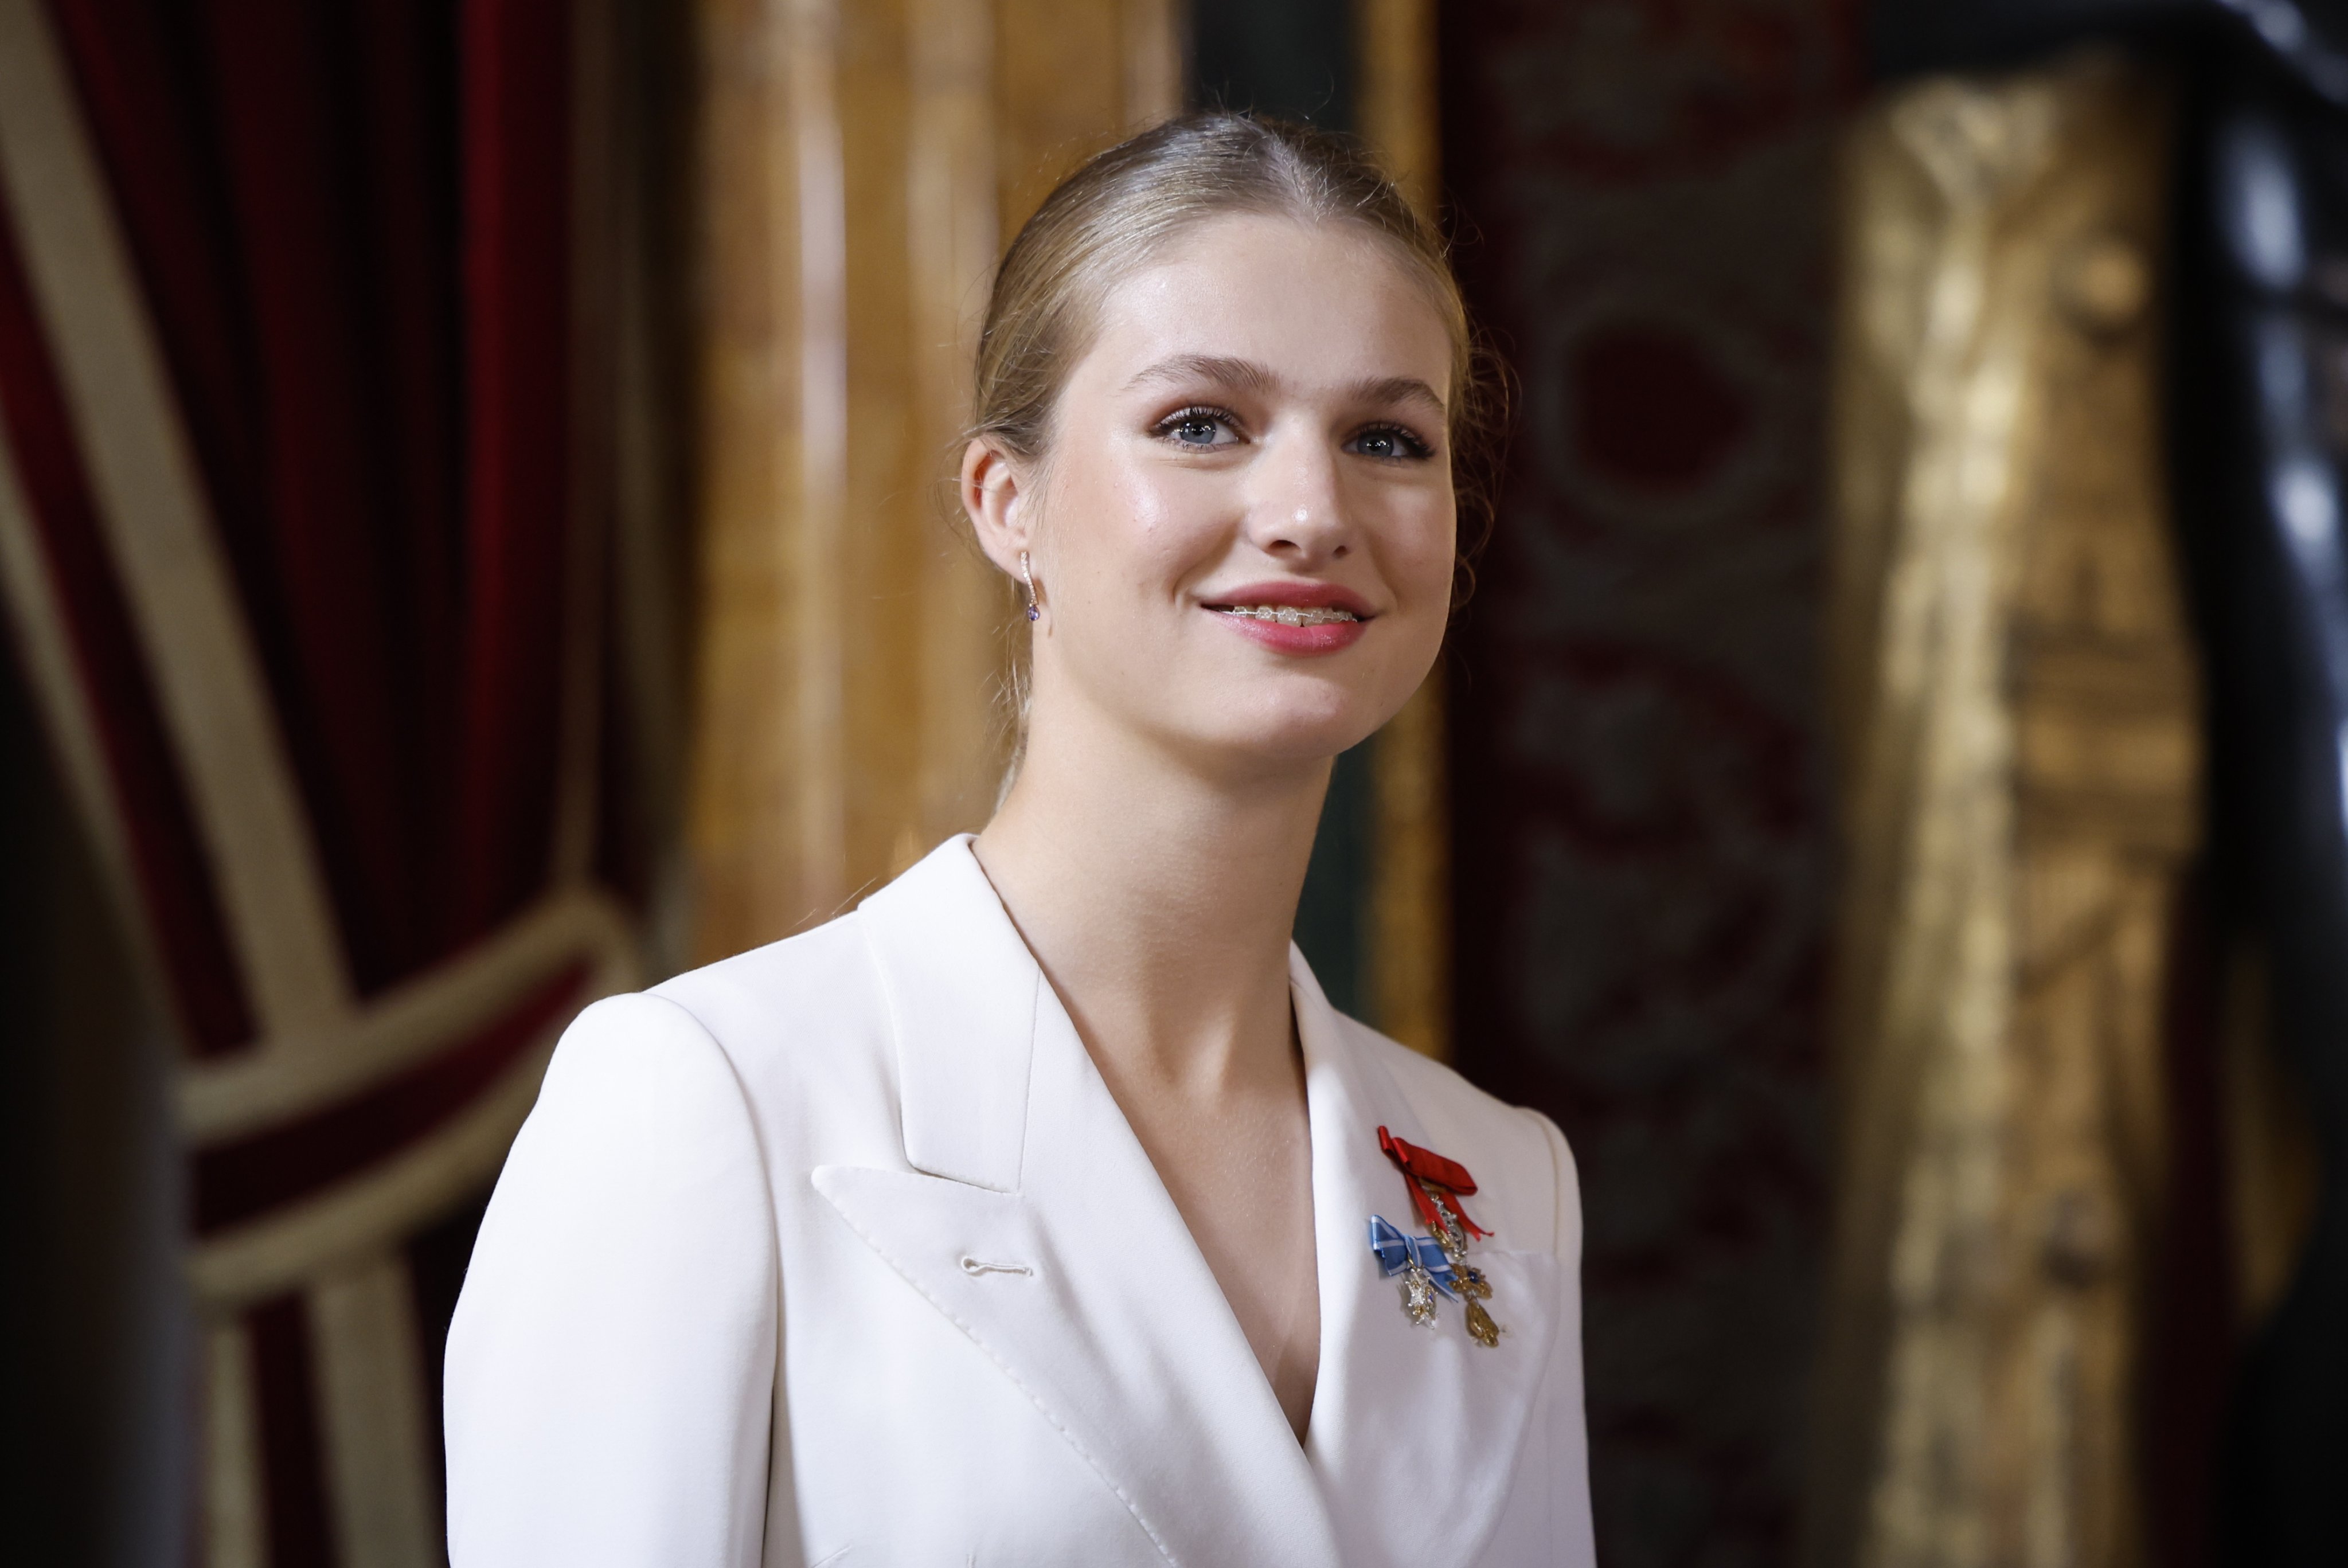 Spain’s Crown Princess Leonor at the Royal Palace in Madrid on Tuesday. Photo: EPA-EFE